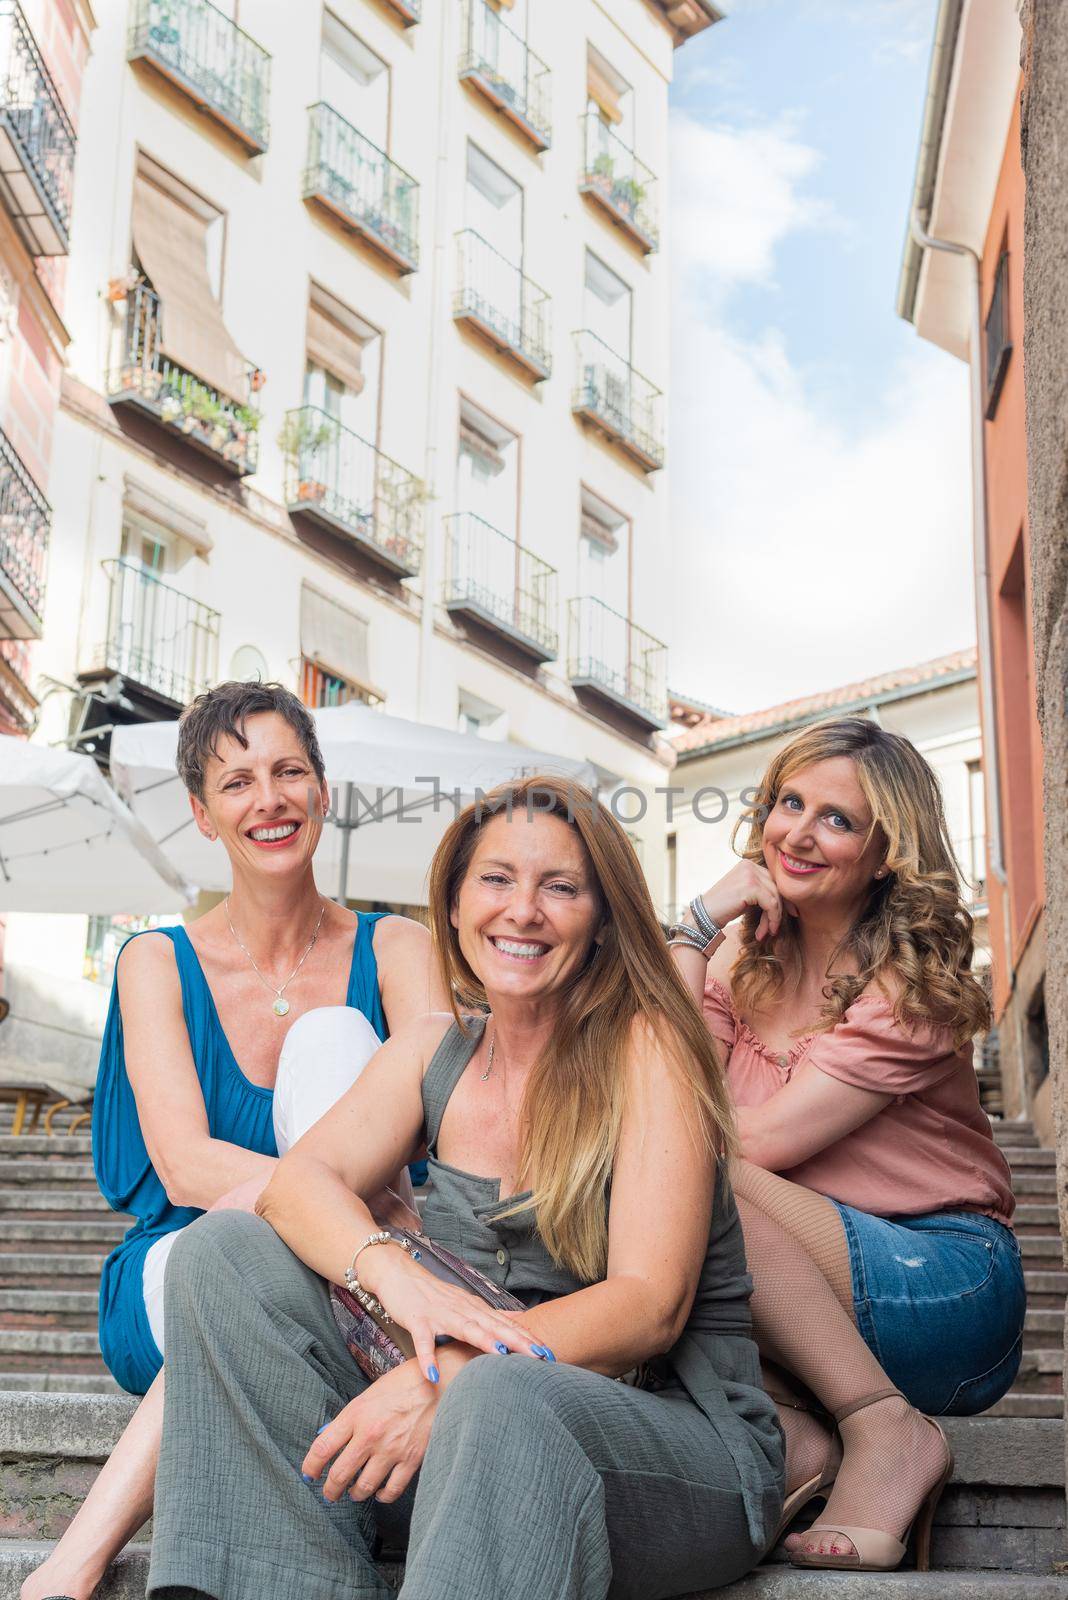 Three cheerful adult women sitting in stoned stairs and looking at the camera. Beautiful mature women having a good time together.